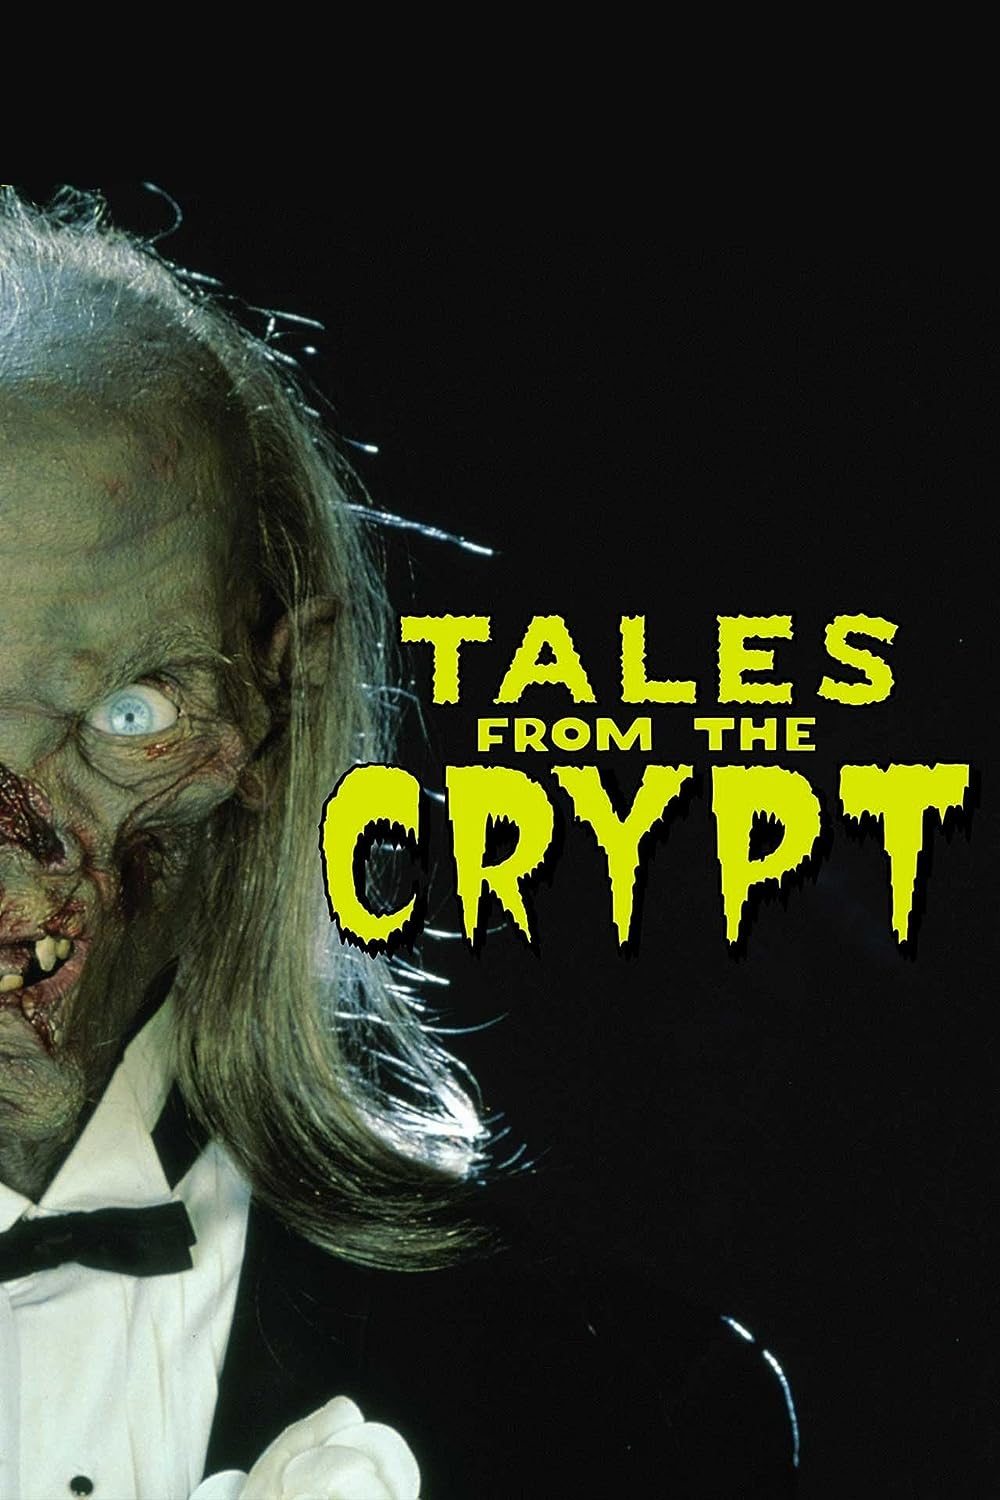 Tales from the Crypt (TV Series 1989–1996) - IMDb